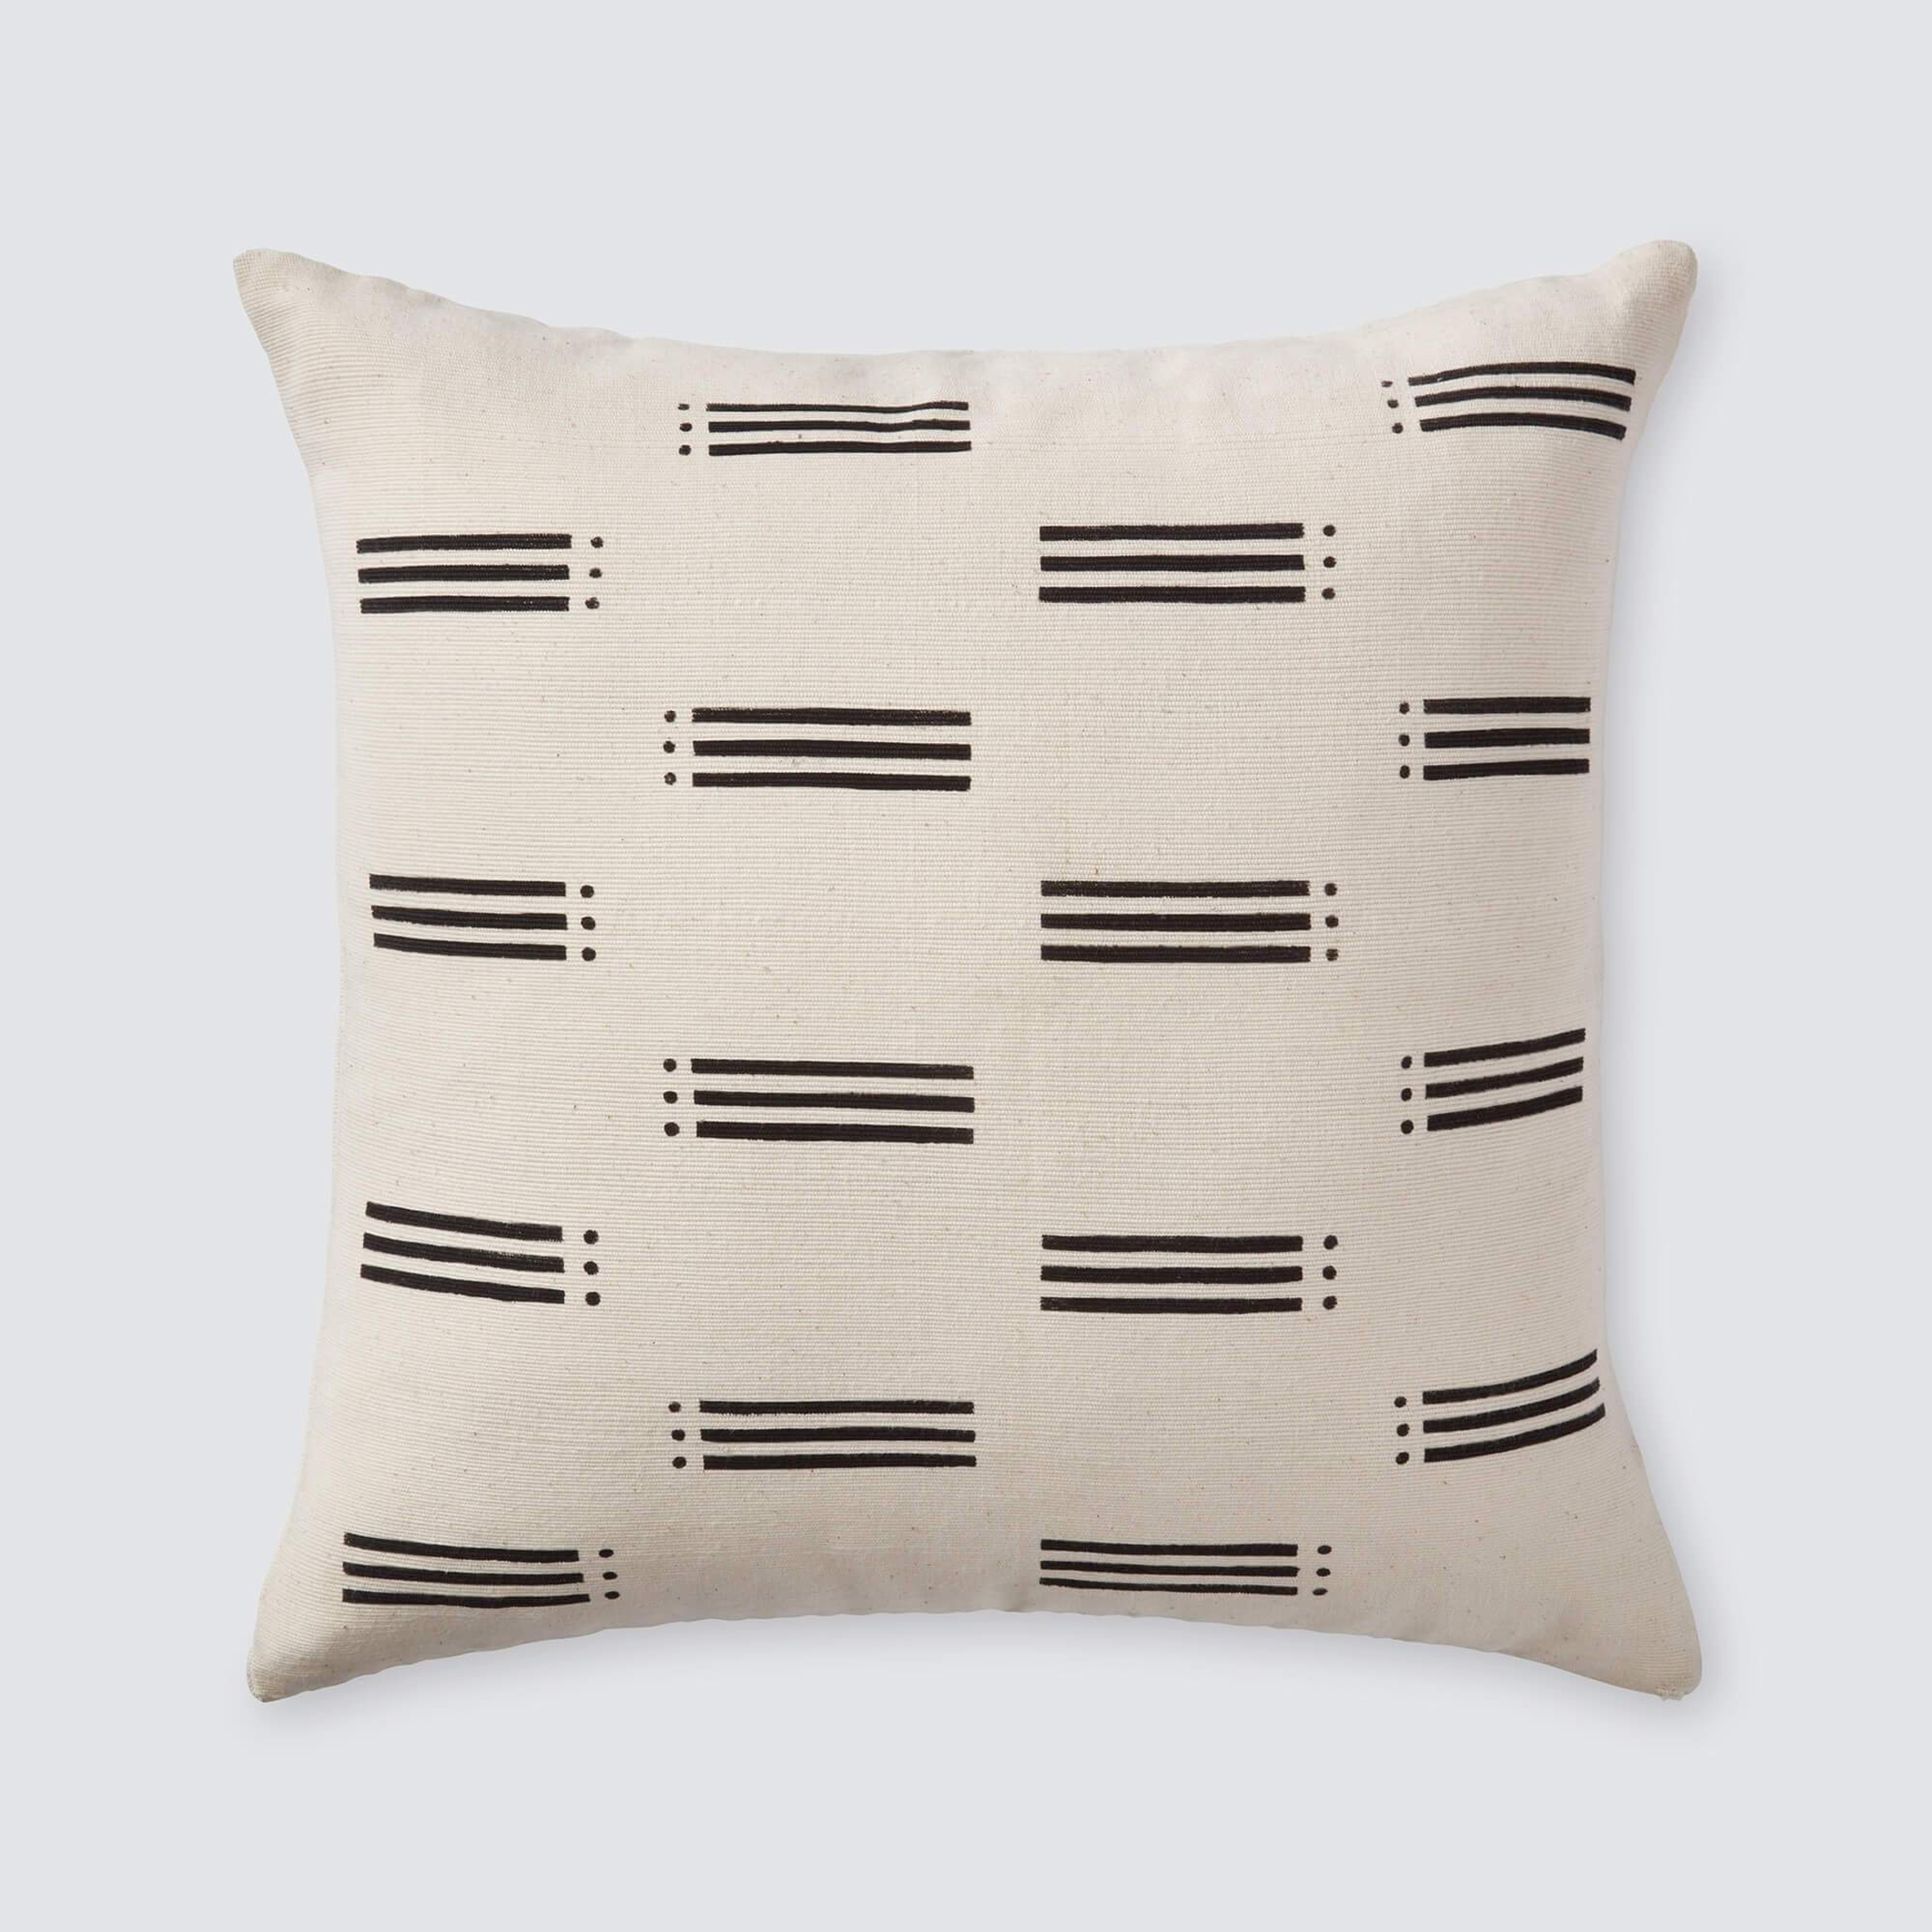 Soleil Mud Cloth Pillow By The Citizenry - The Citizenry